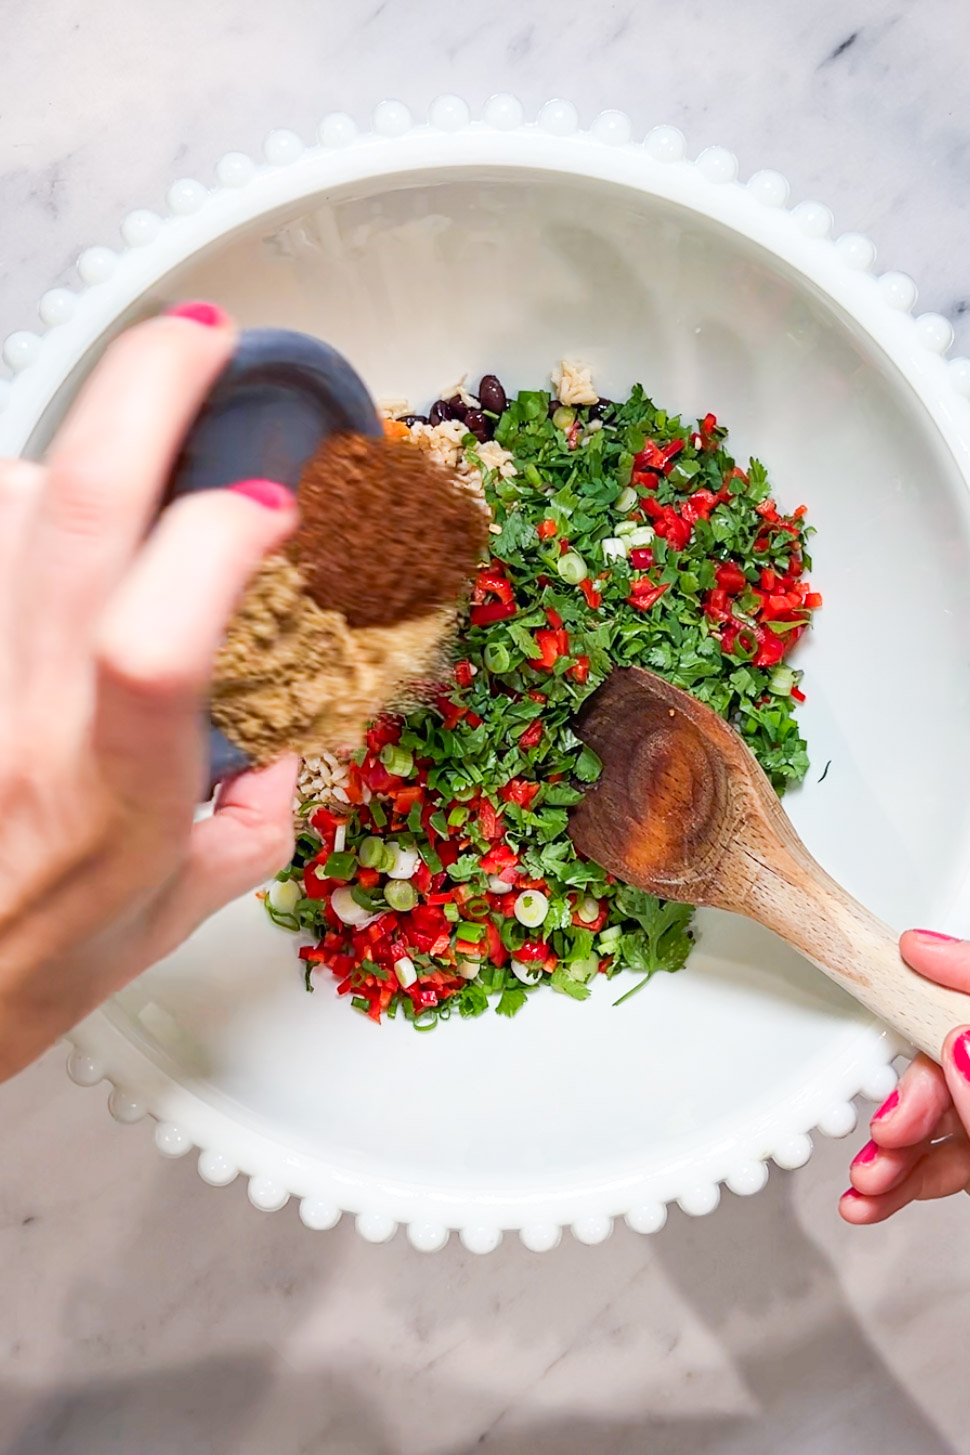 A person sprinkling southwestern spices on a plate of vegetables.